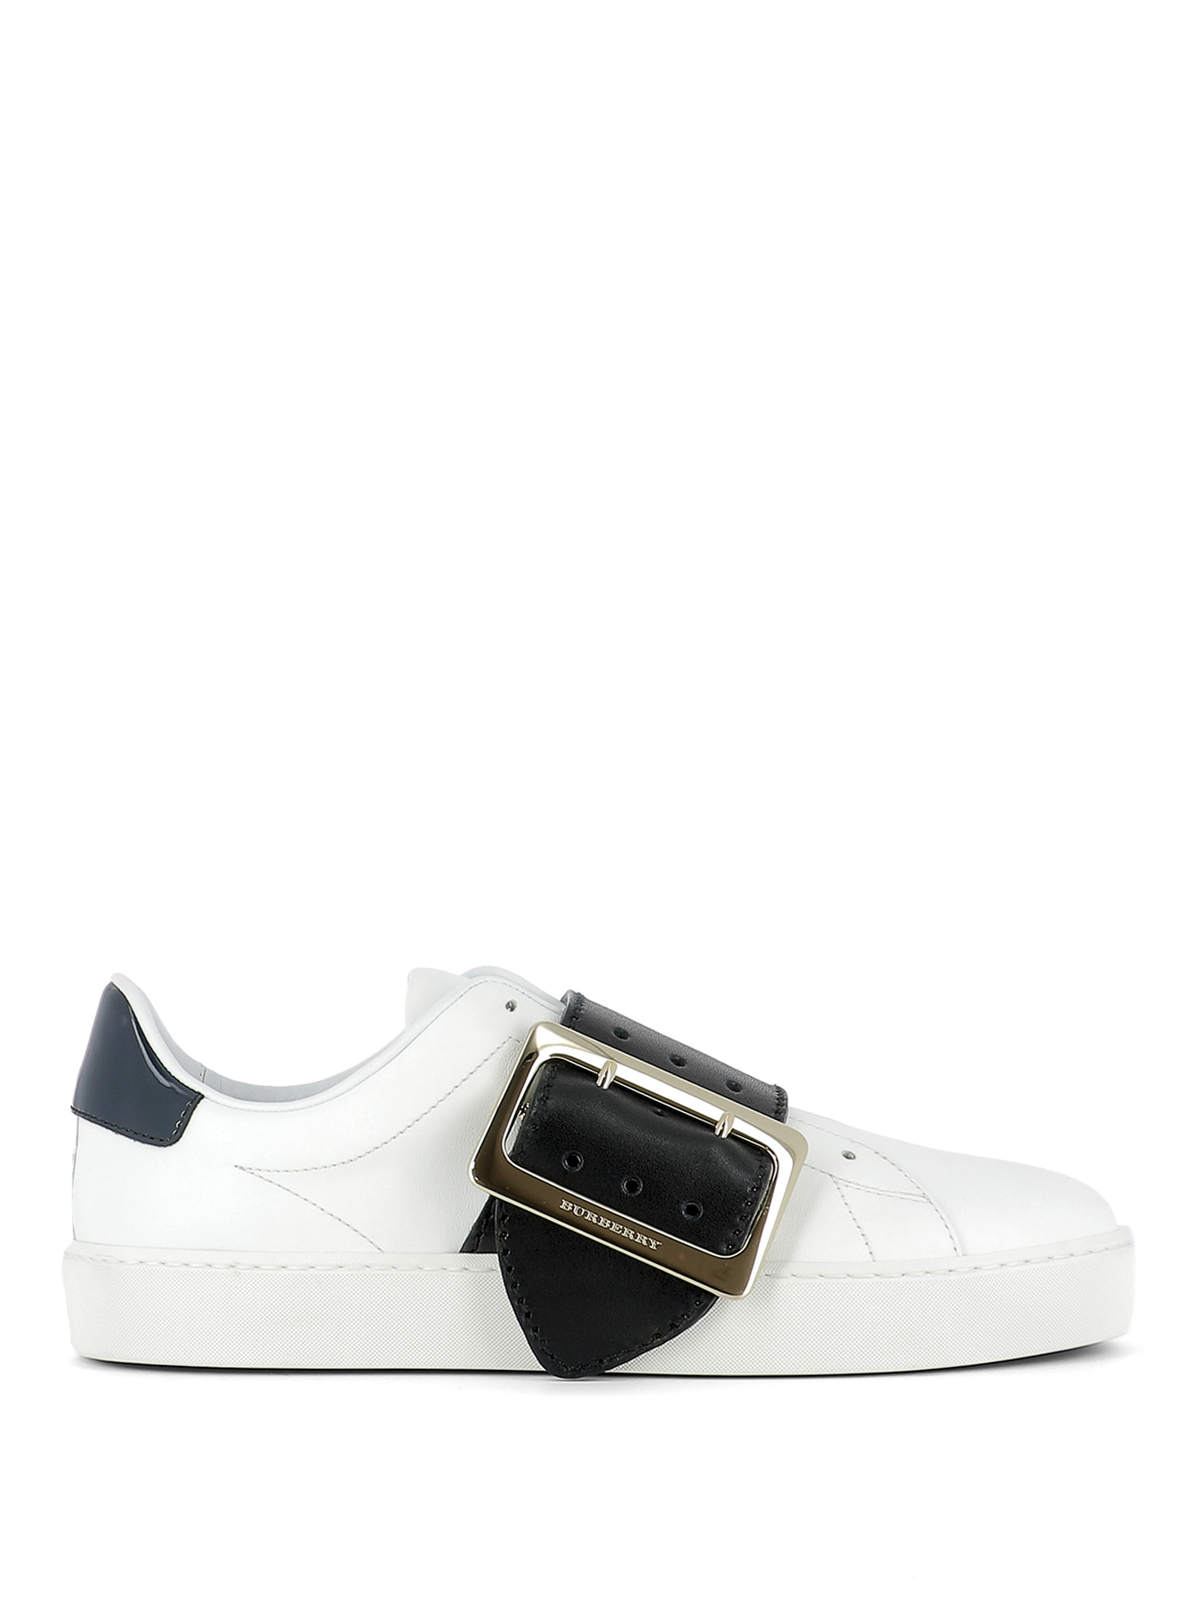 Burberry - Westford leather sneakers - trainers - 4037428 | iKRIX.com